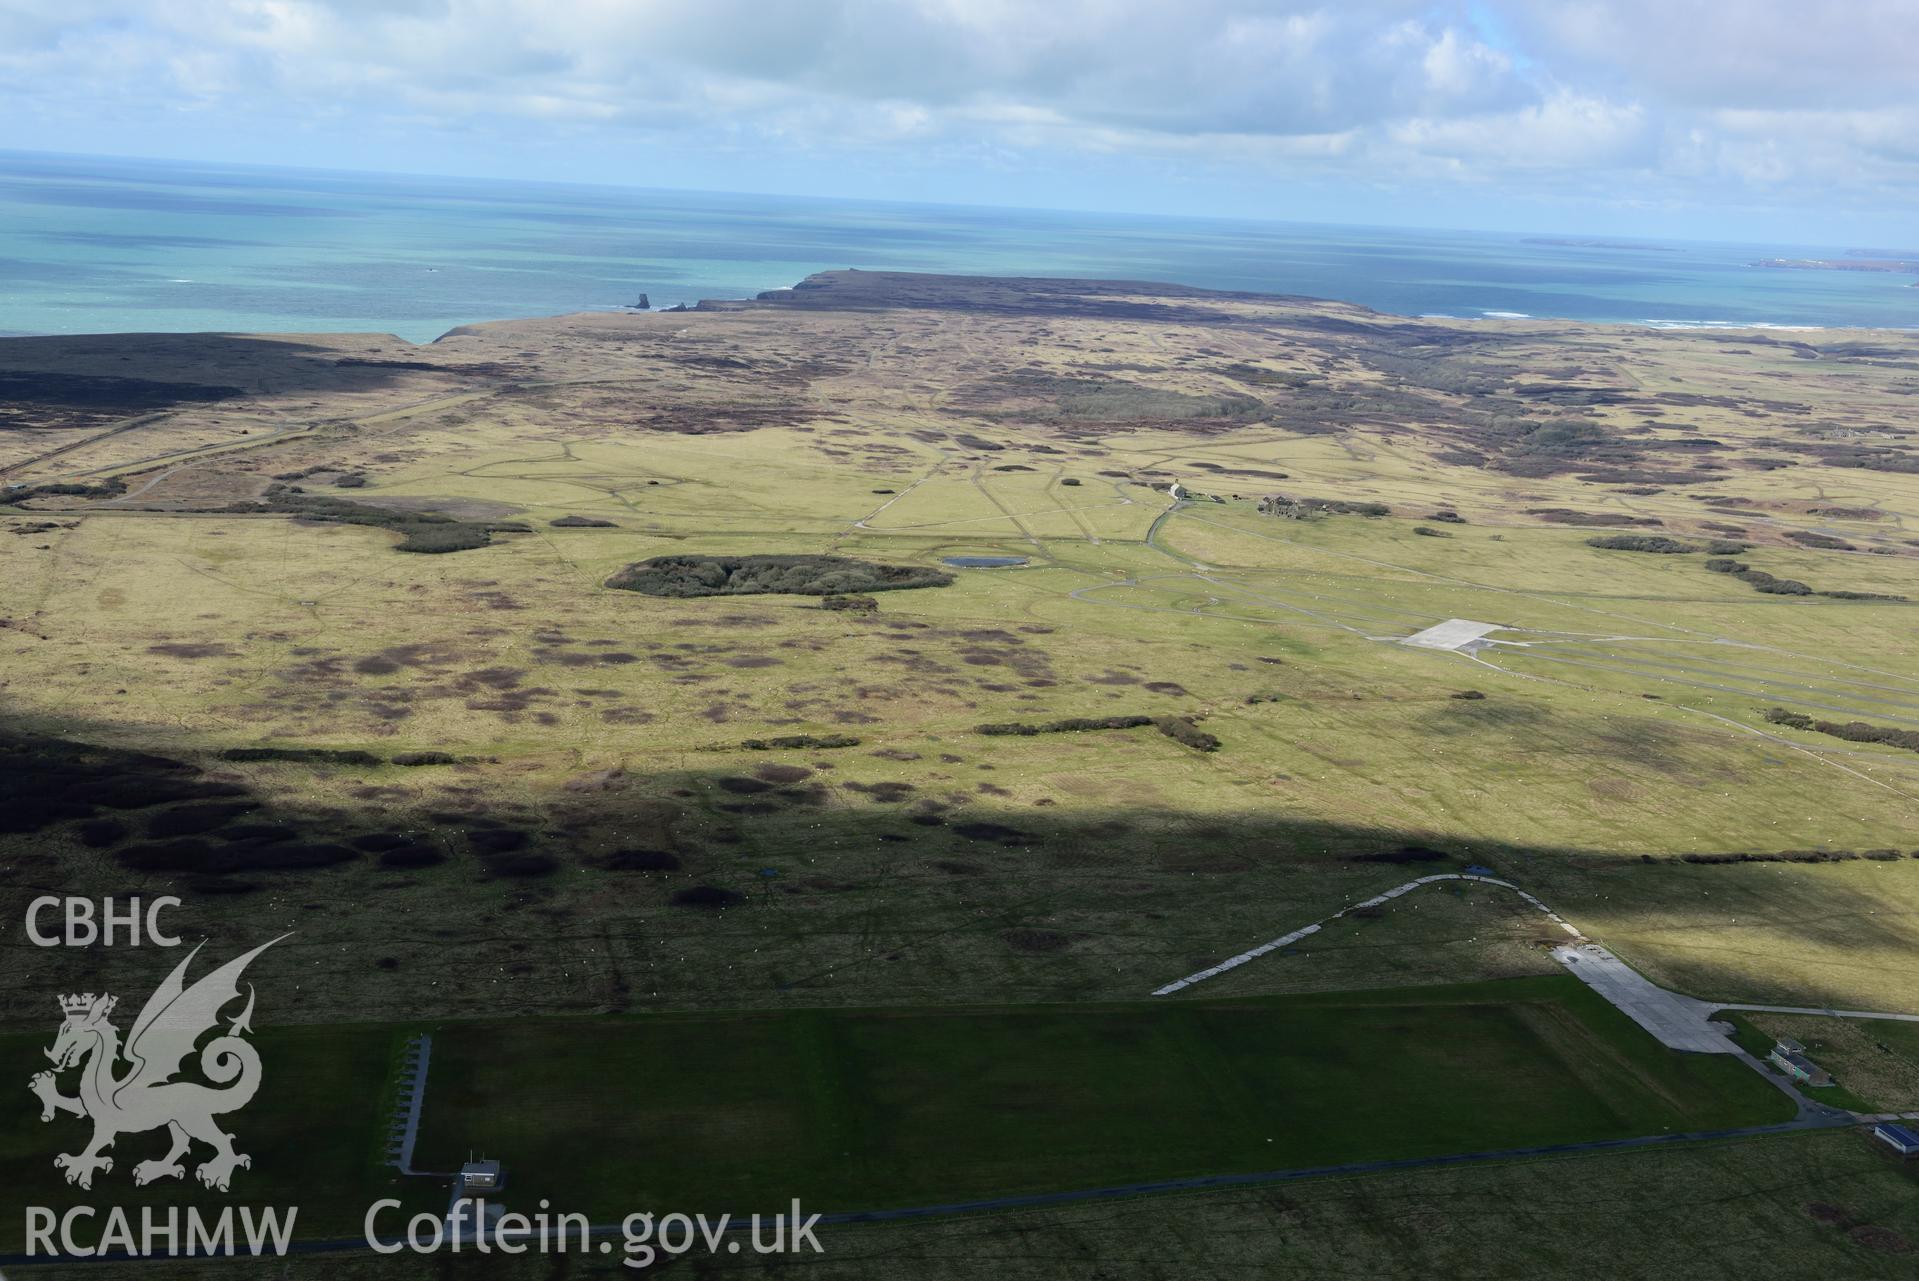 Trevallen Downs Tank Range. Baseline aerial reconnaissance survey for the CHERISH Project. ? Crown: CHERISH PROJECT 2018. Produced with EU funds through the Ireland Wales Co-operation Programme 2014-2020. All material made freely available through the Open Government Licence.